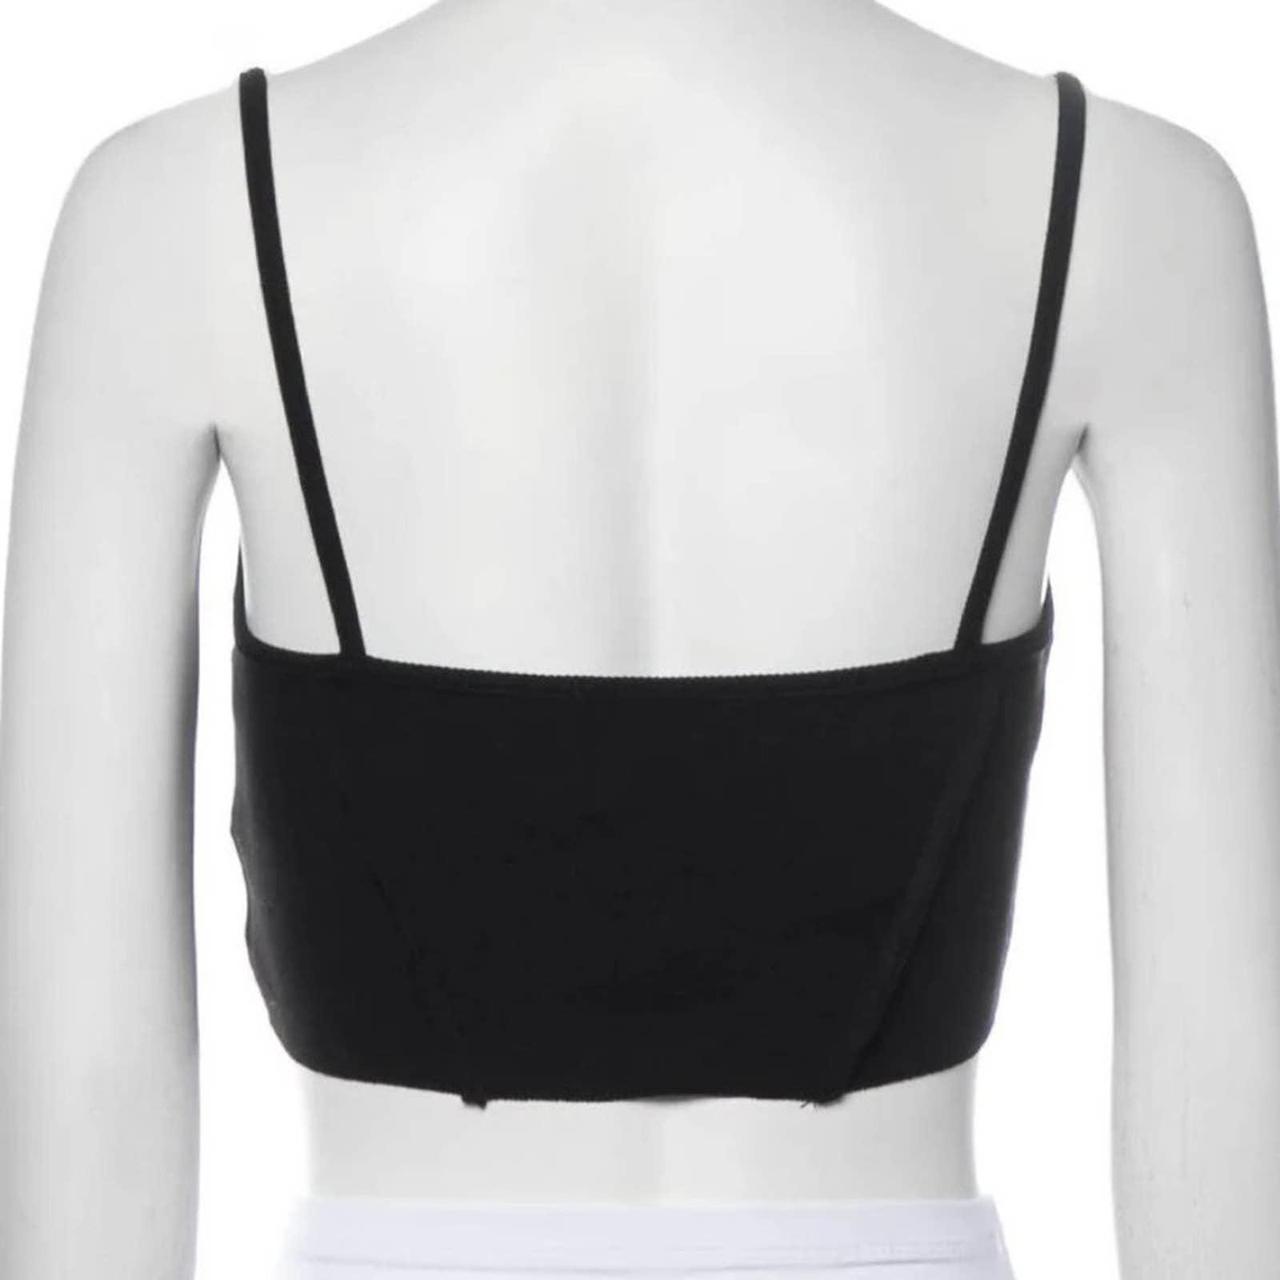 Product Image 4 - Description:
Atoir Crop Top
Black
Sleeveless with Square